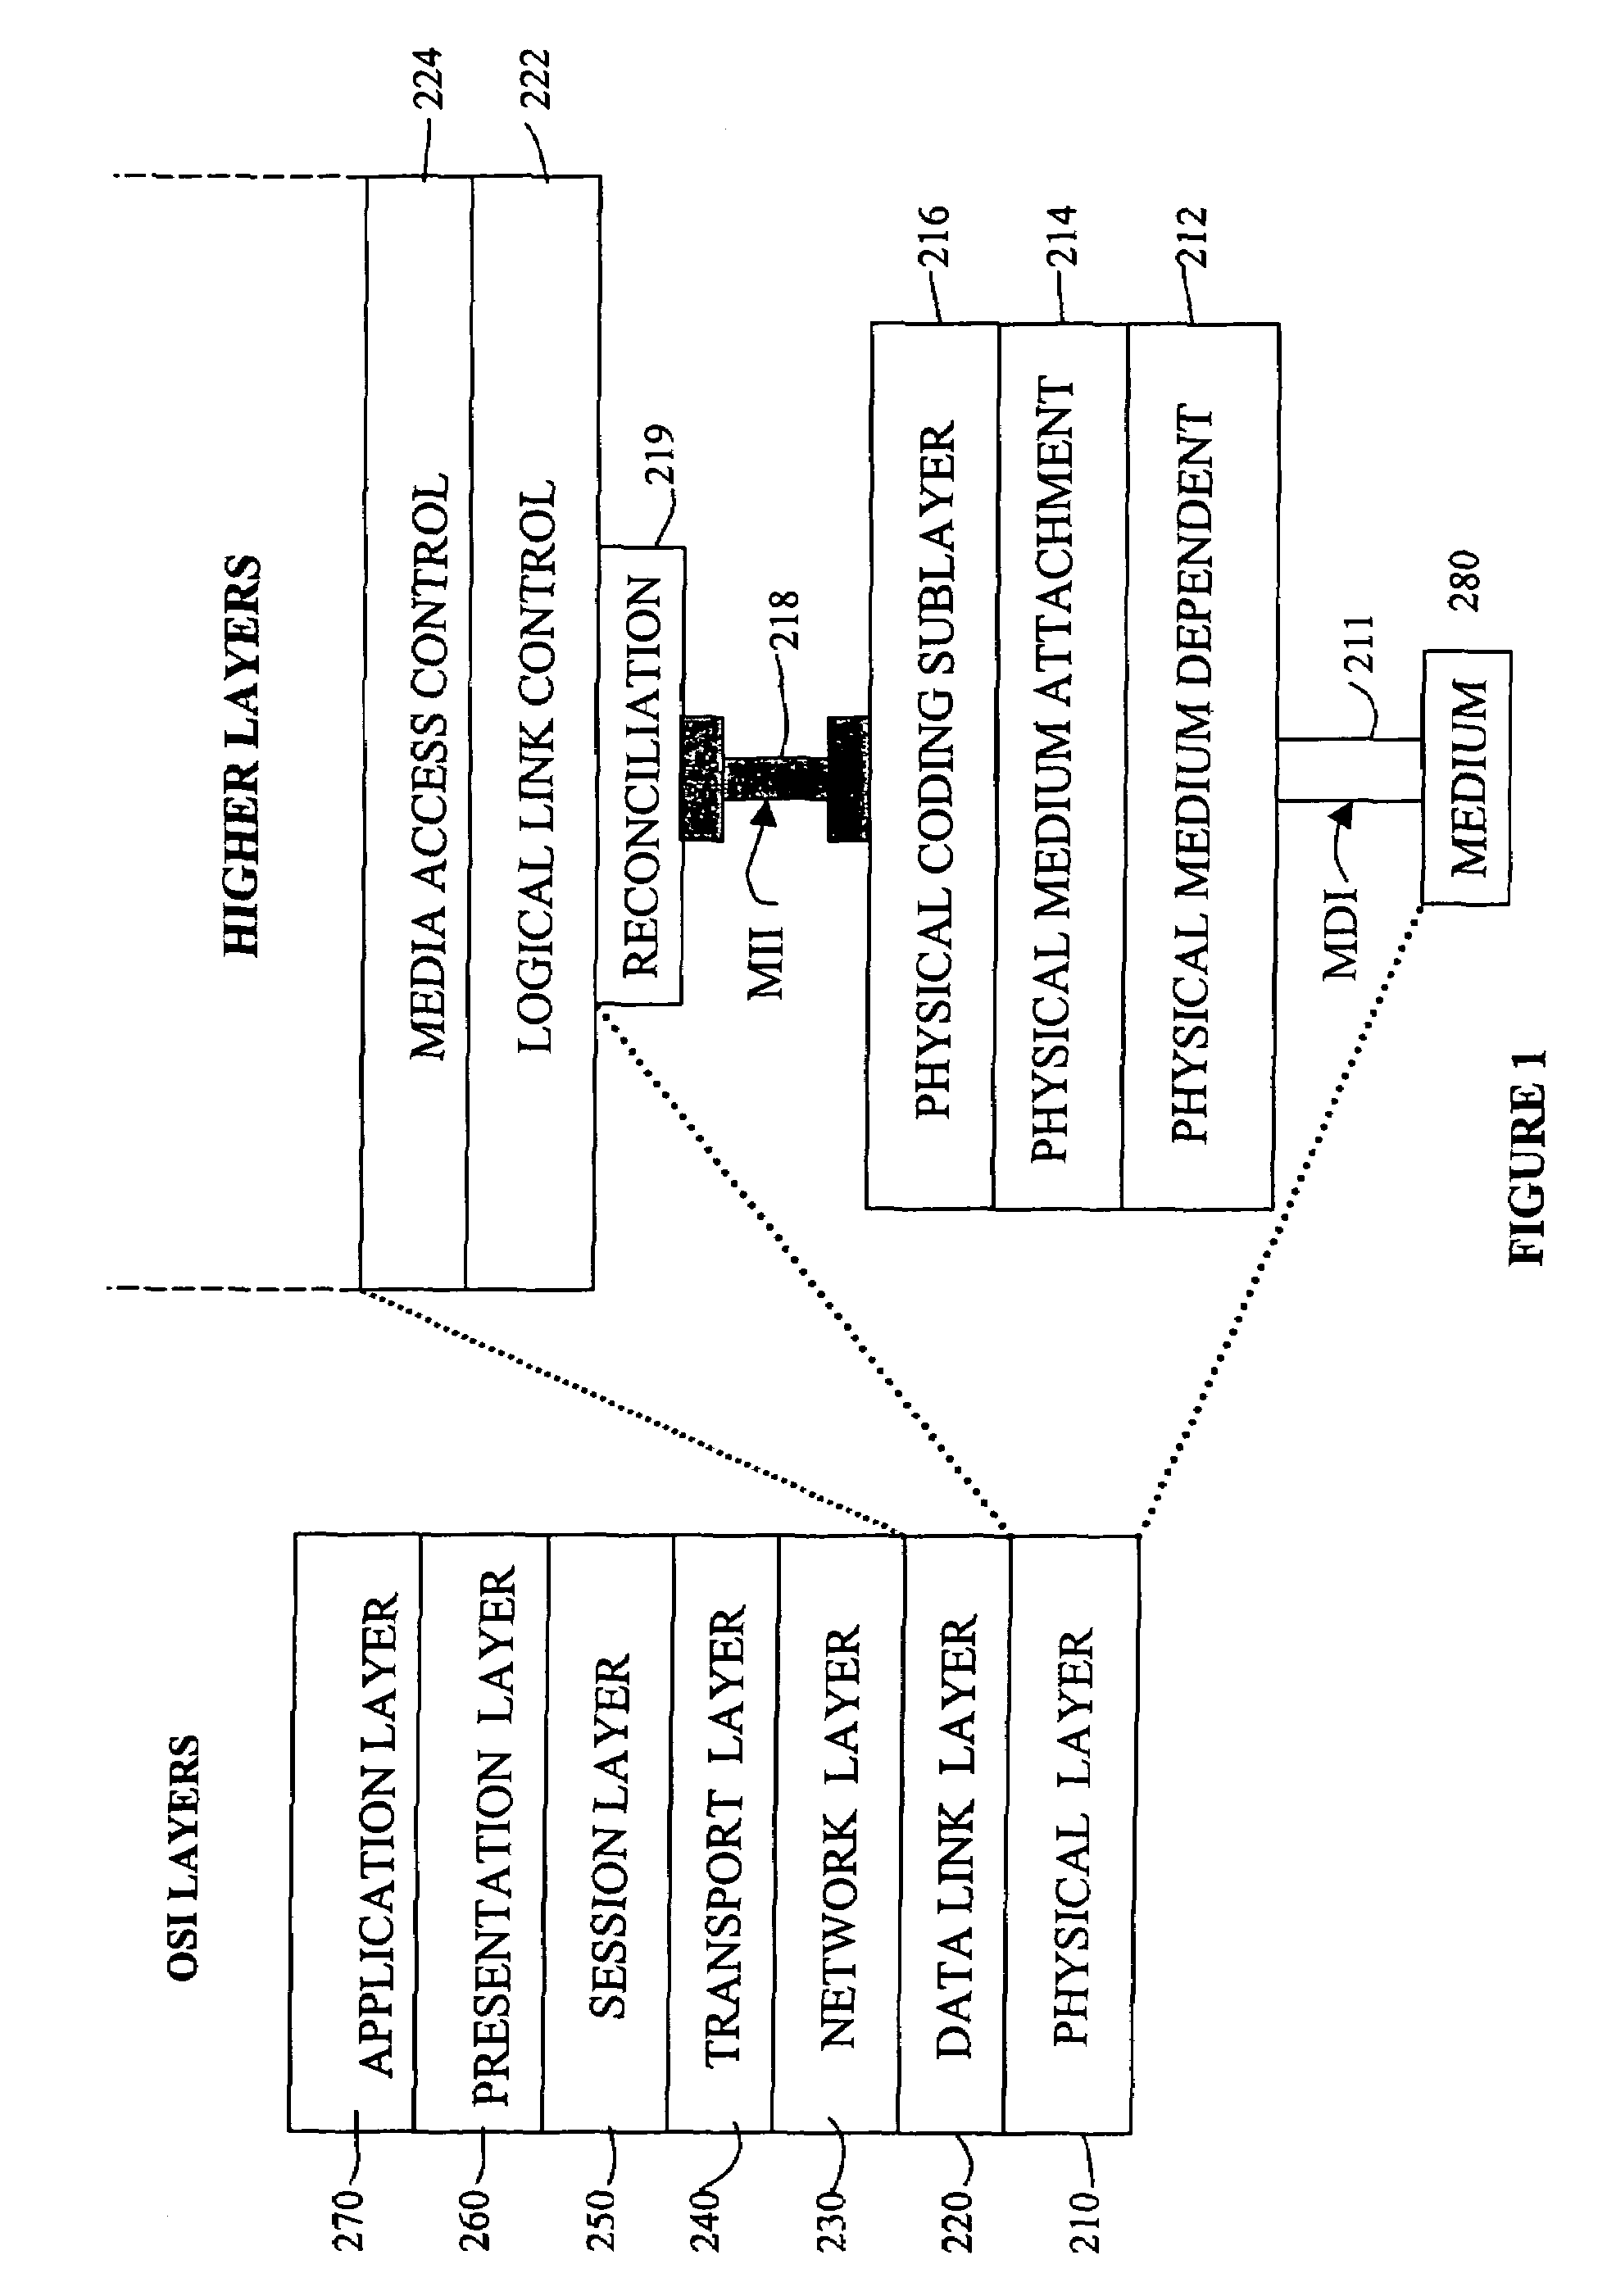 Data communication system, method and apparatus for communicating a data signal formed of successive data elements